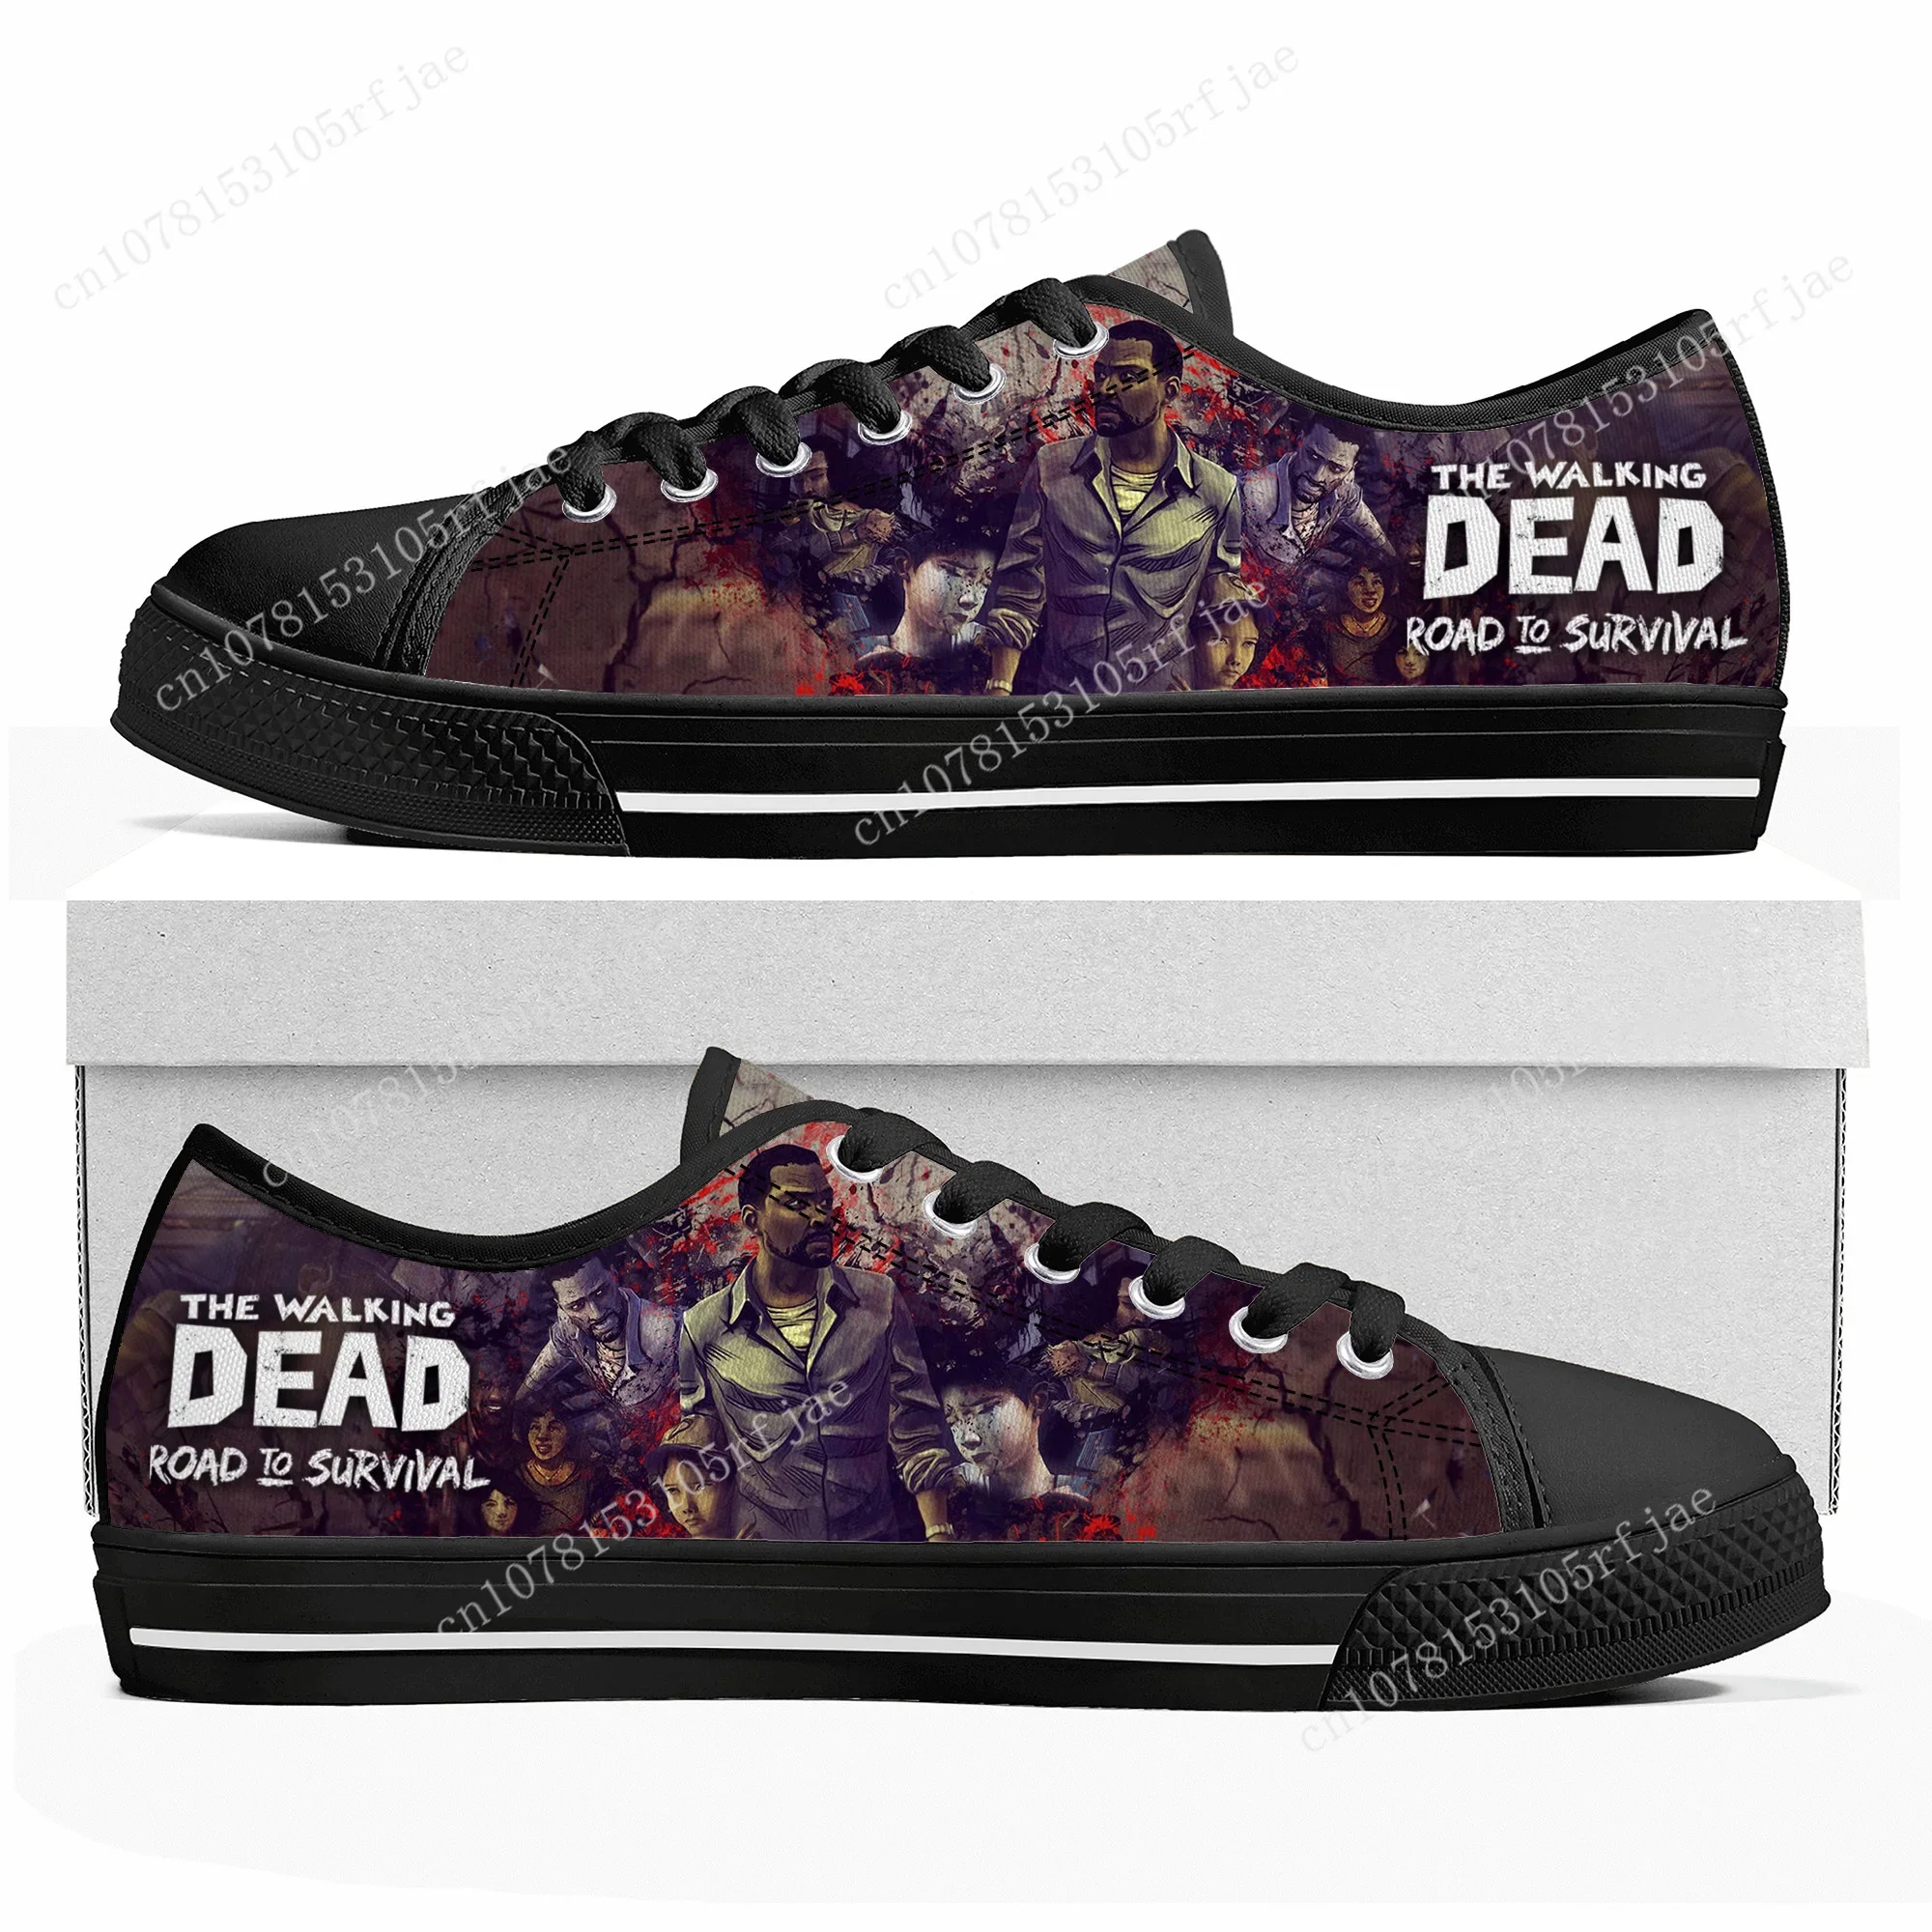 the-walking-dead-canvas-sneakers-para-mulheres-e-adolescentes-low-top-sneakers-cartoon-game-shoes-moda-casual-tailor-made-alta-qualidade